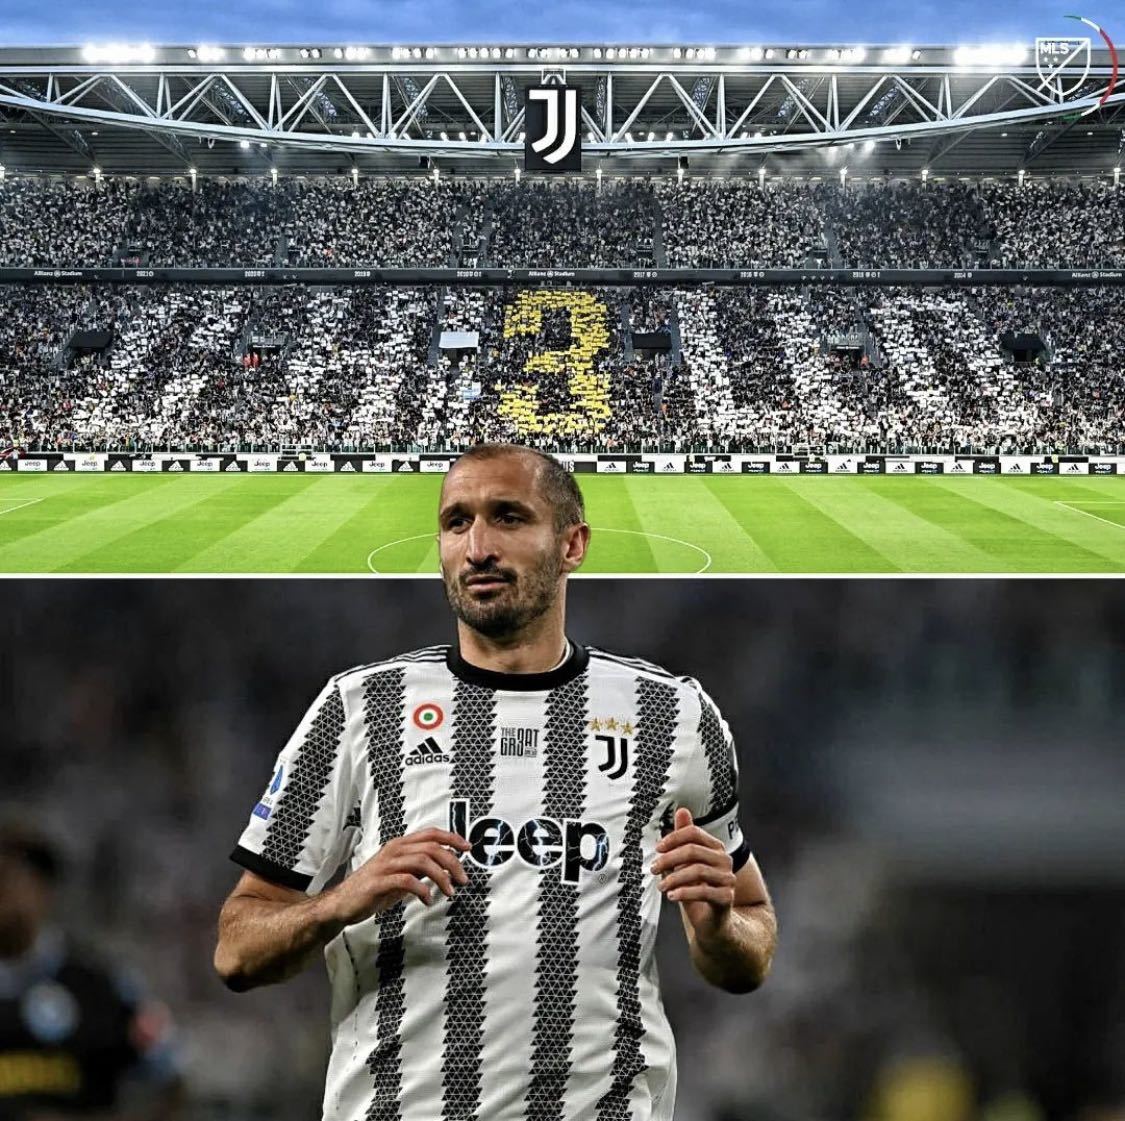 Paypayフリマ 世界限定560セット 21 22 キエッリーニ Limited Edition ユベントス Juventus Home ユニフォーム 正規品 新品未使用 タグ付き